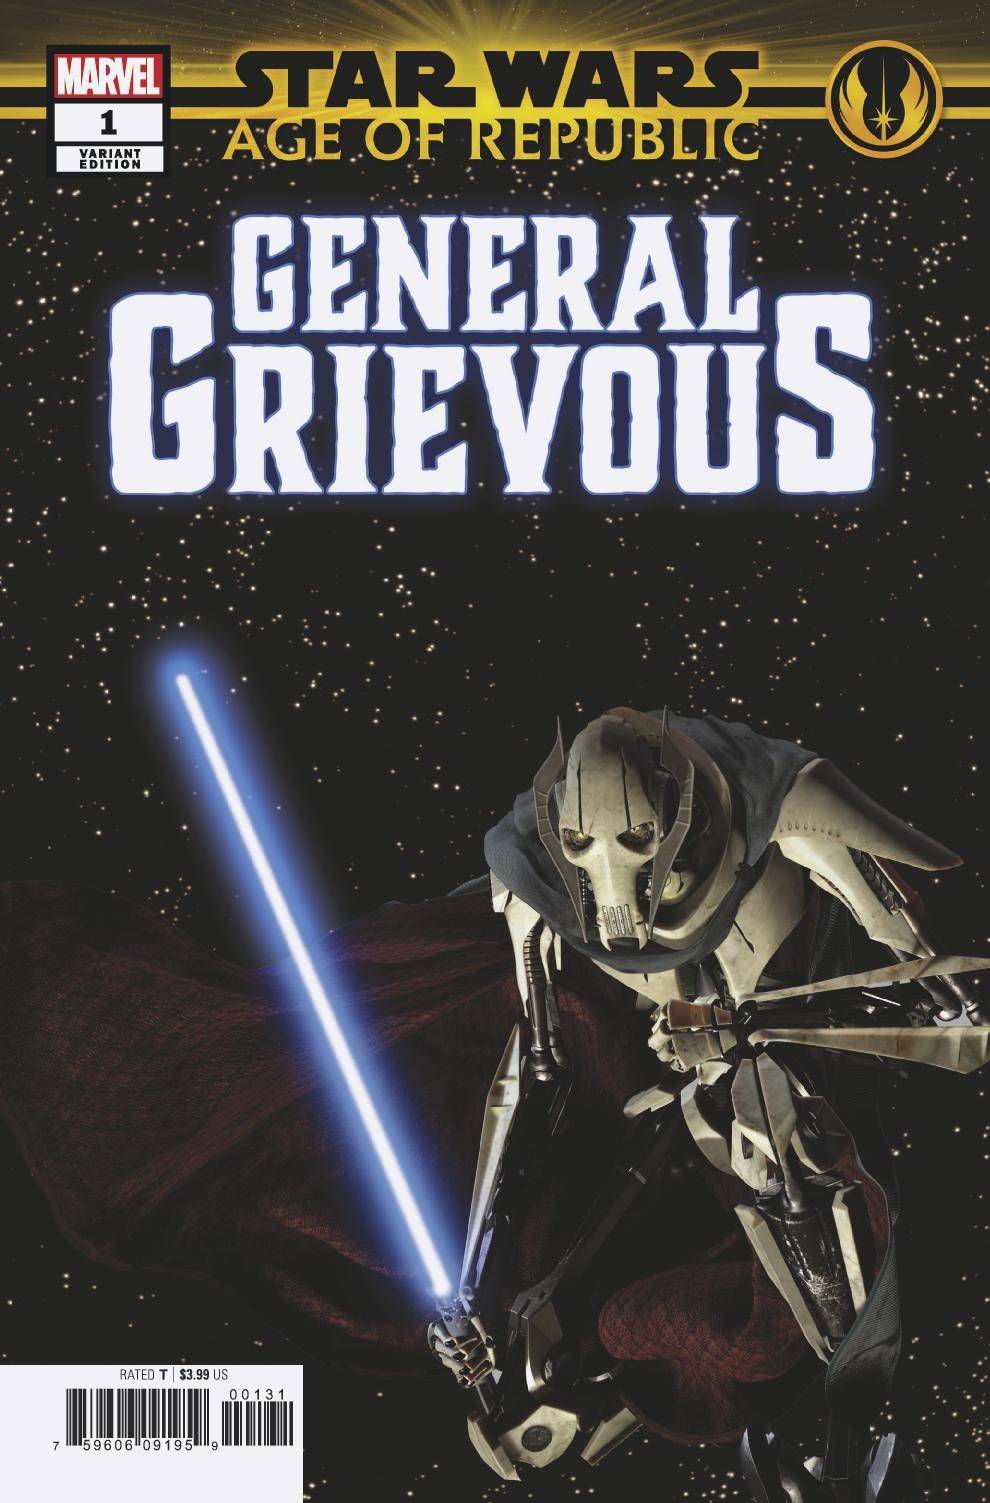 Star Wars Age of Republic General Grievous #1 Movie Variant